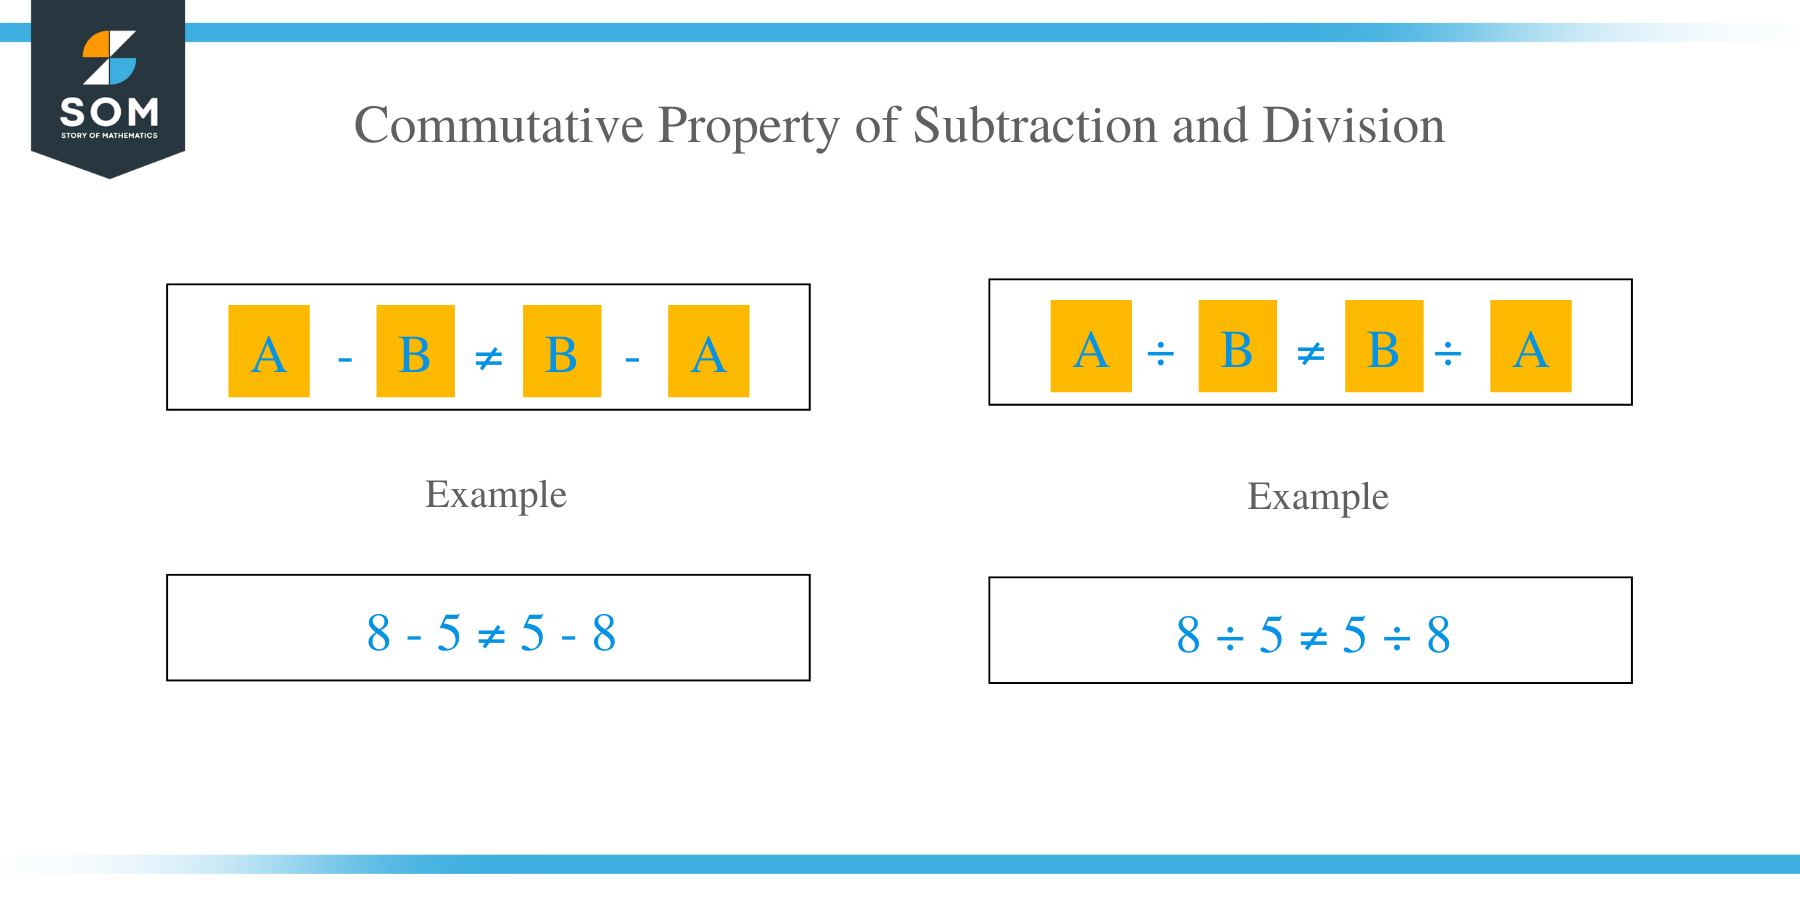 Commutative Property of Subtraction and Division